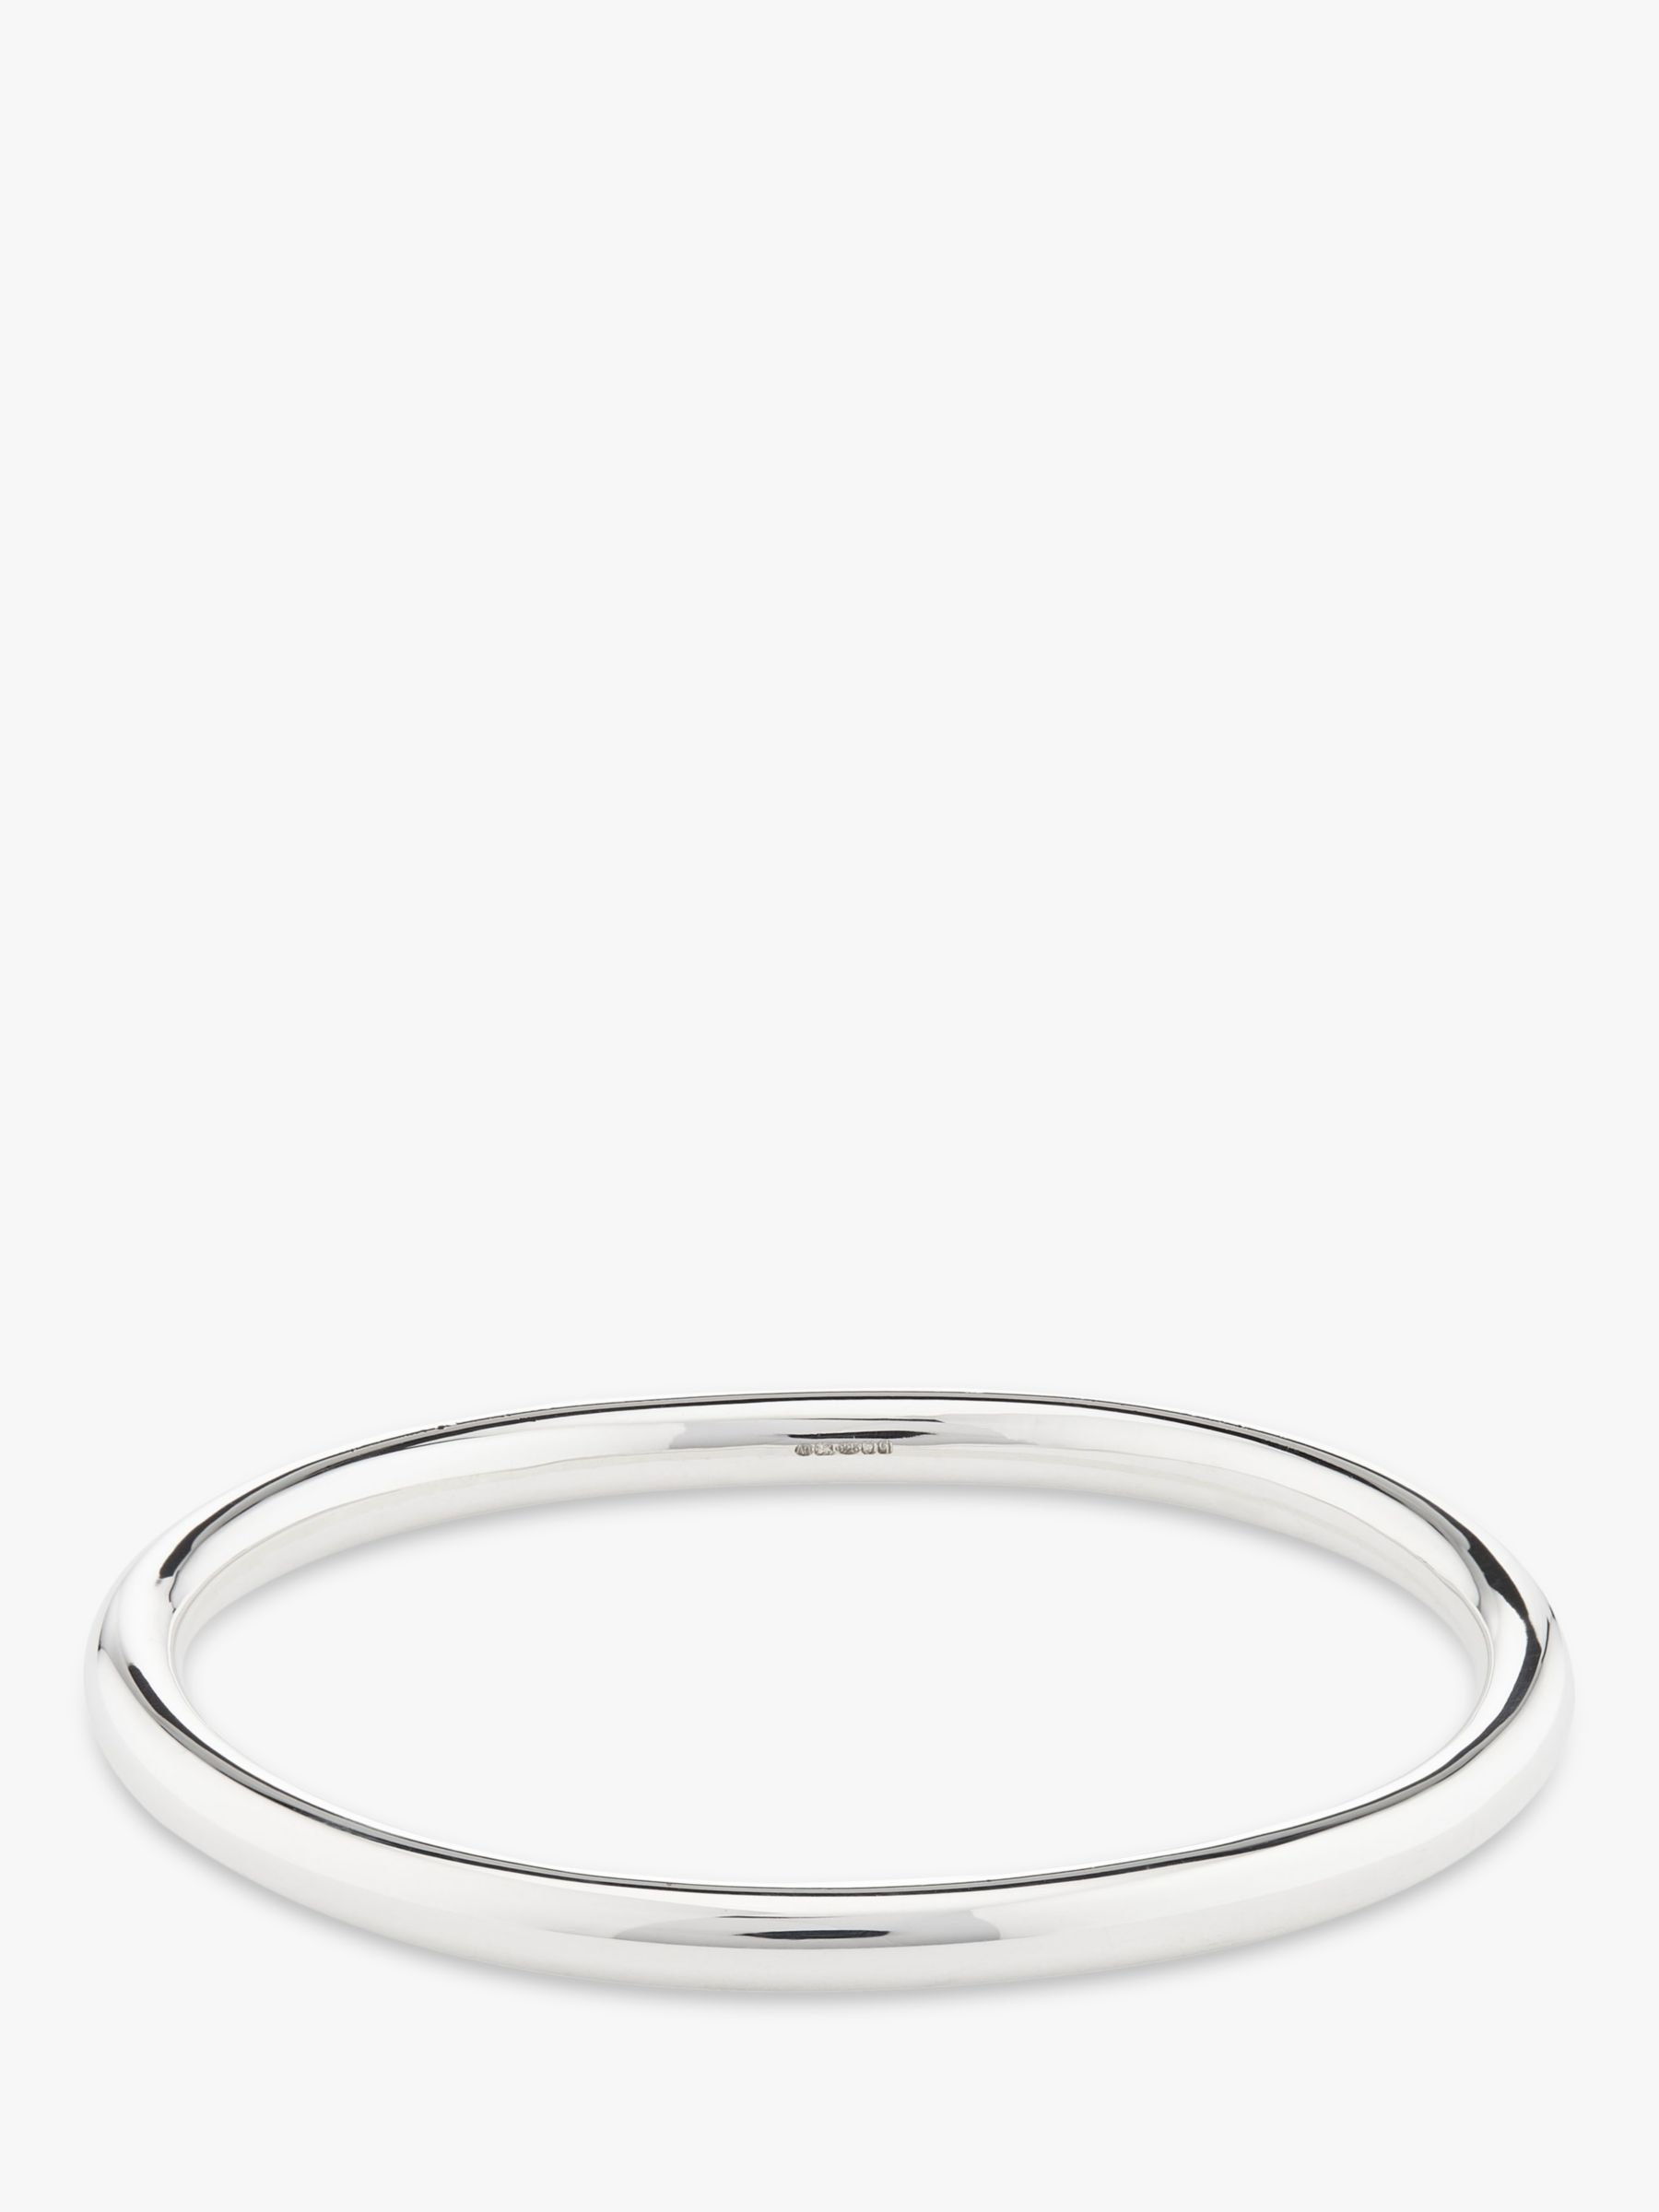 Andea Sterling Silver Oval Polished Bangle, Silver at John Lewis